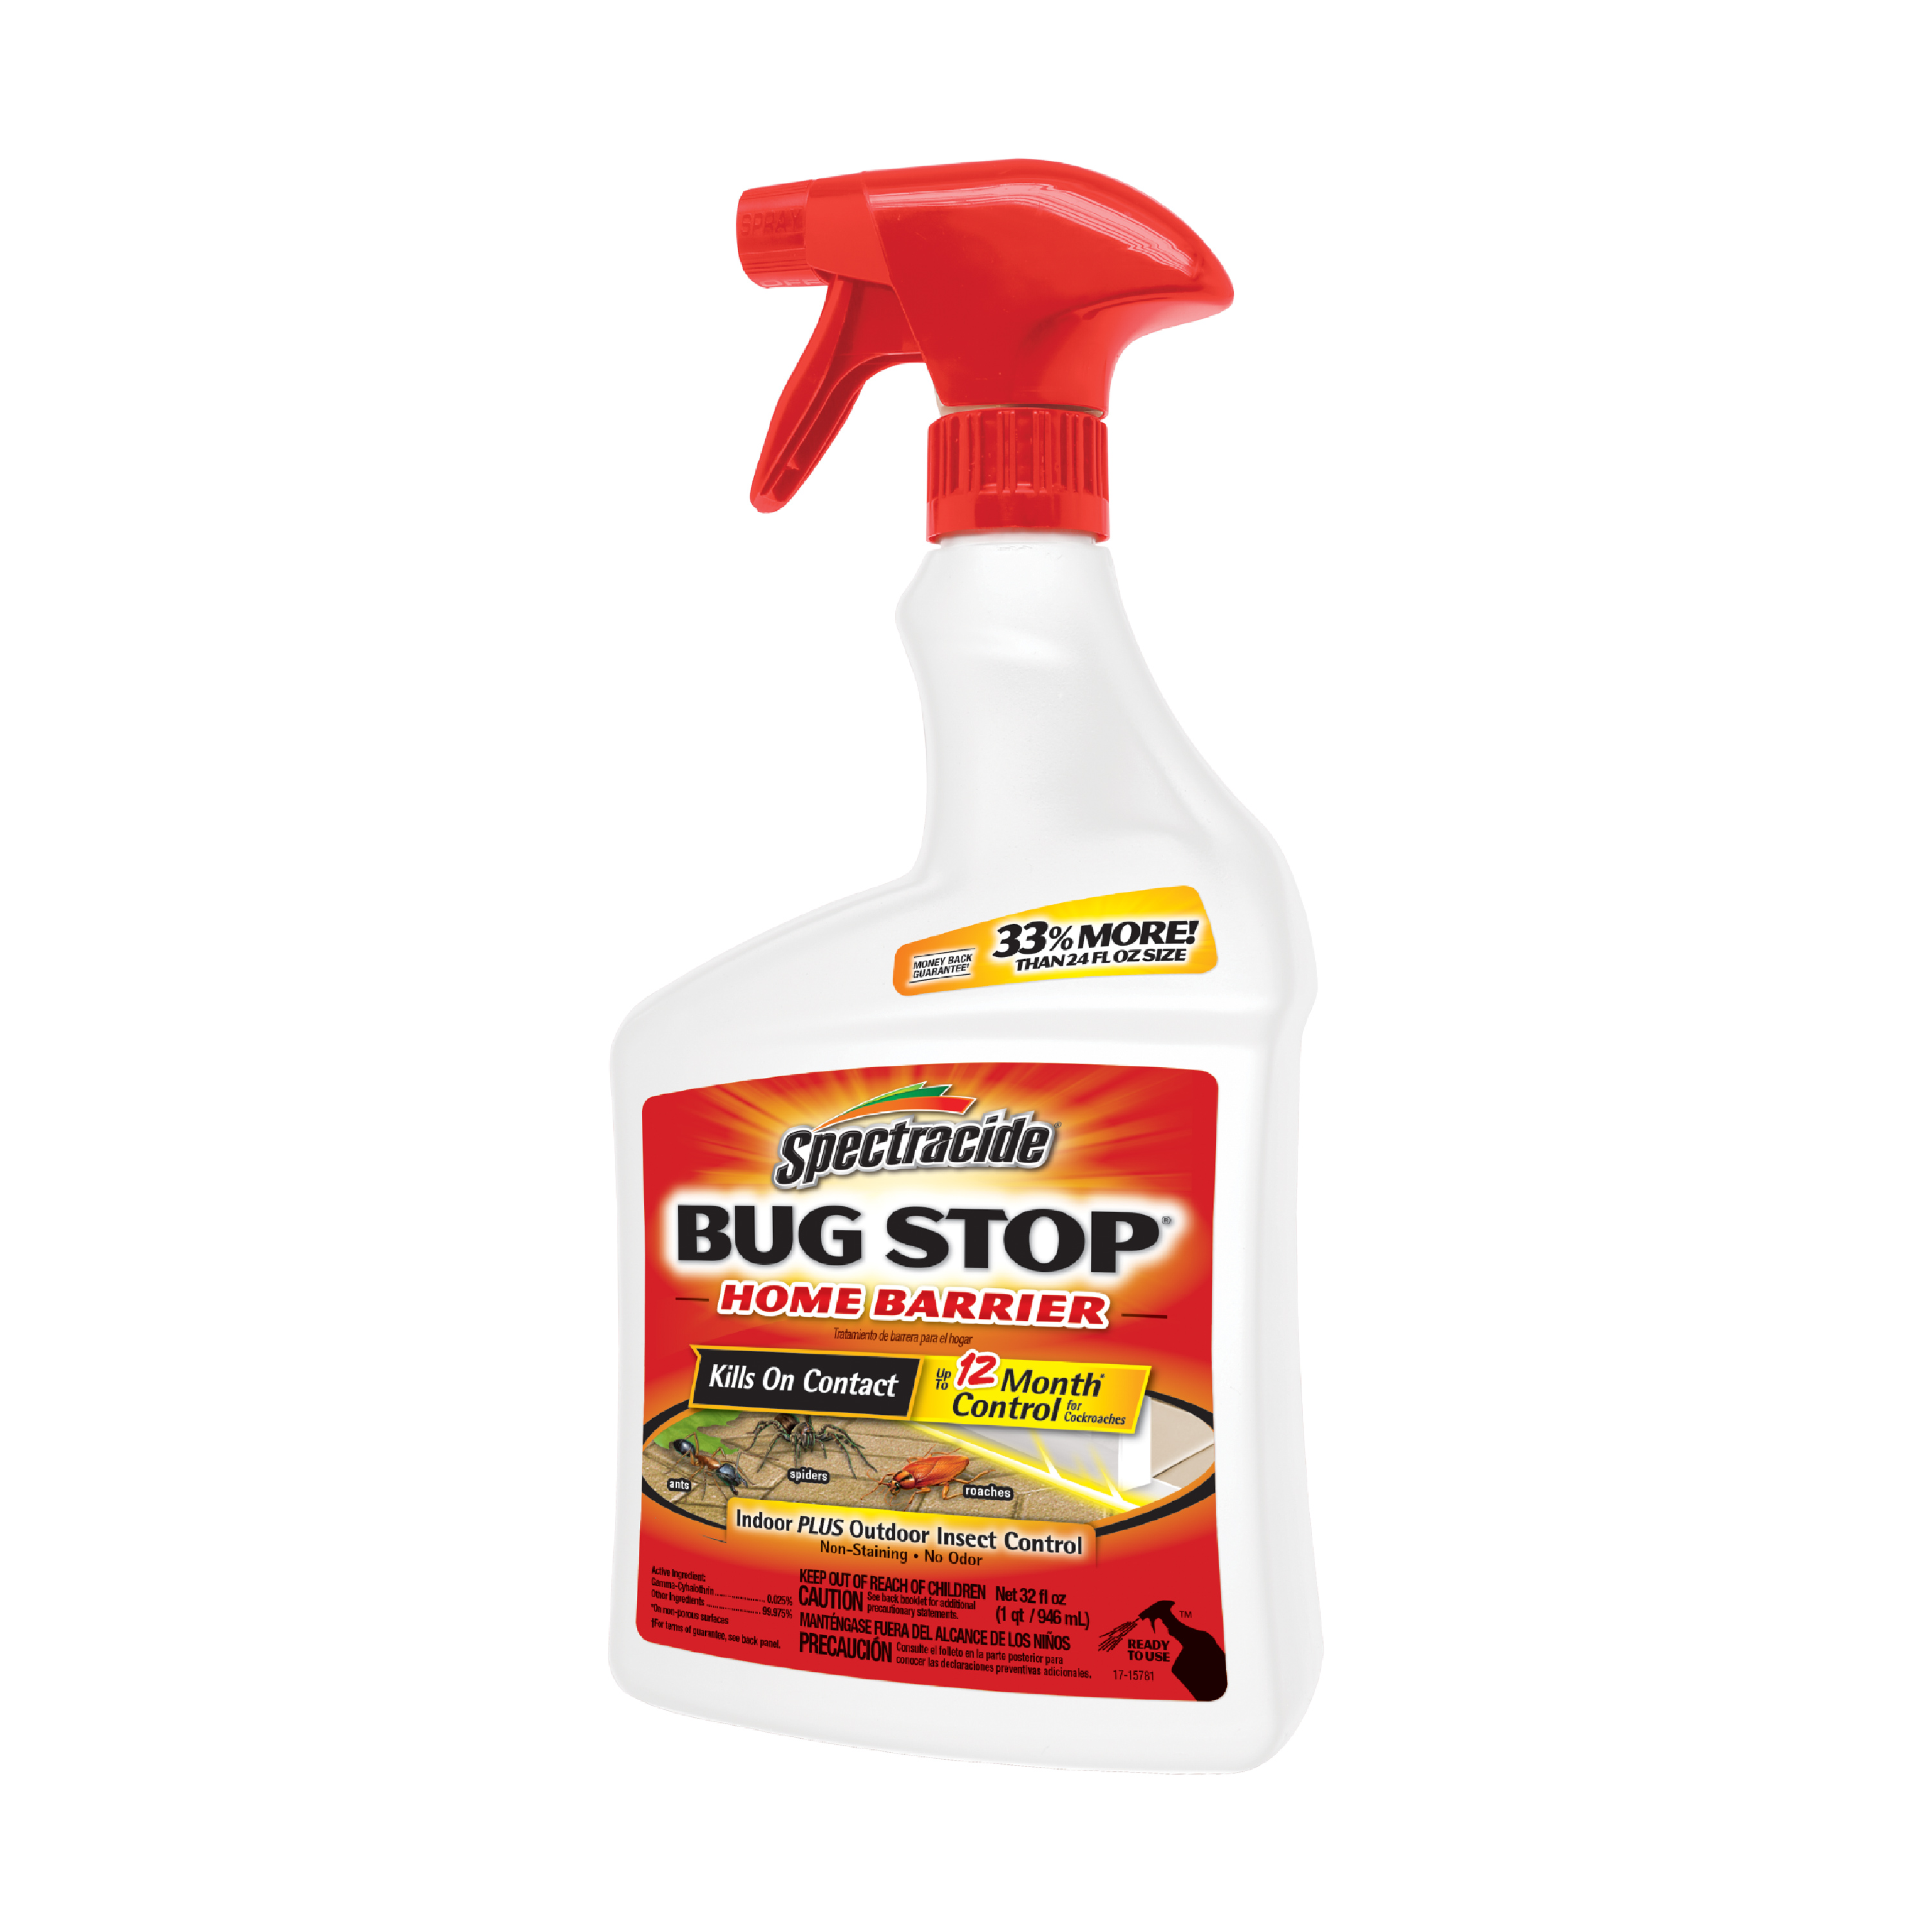 Spectracide Bug Stop Home Barrier, Kills Ants, Roaches, Spiders, Insect Control, 32 fl oz, Spray - image 4 of 11